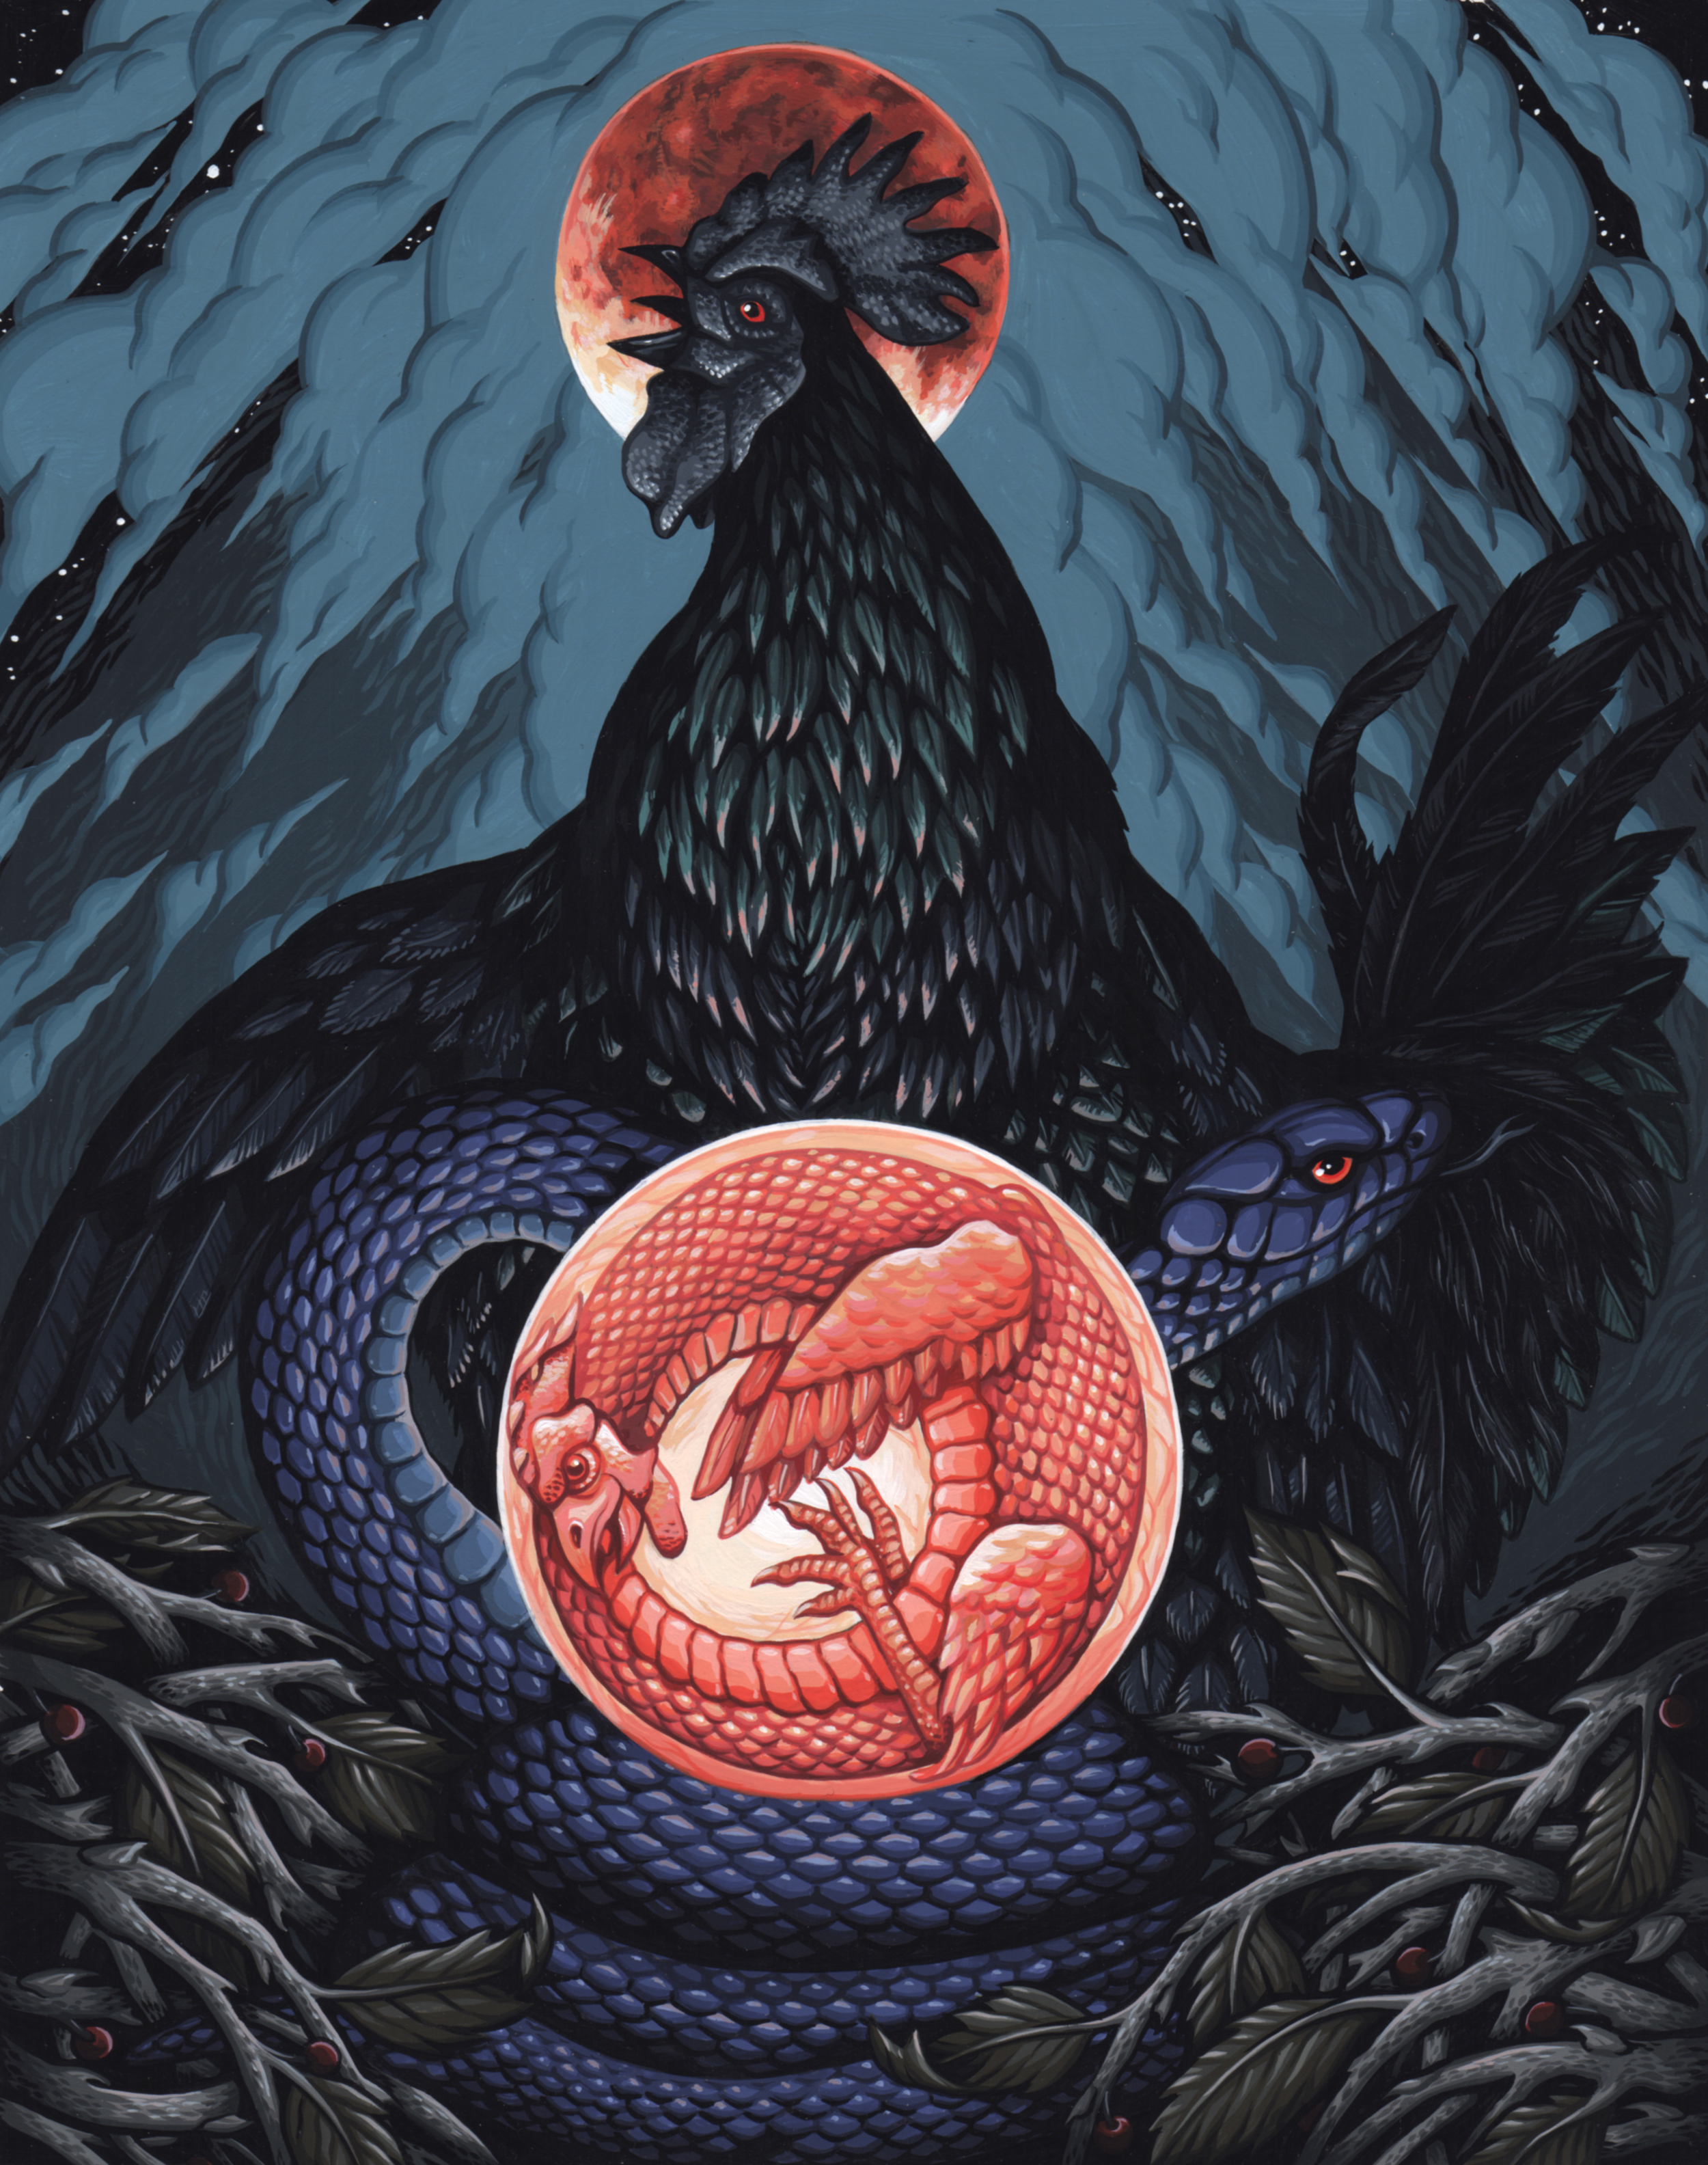  Birth of the Basilisk for the two person show Certain Doom in 2013 with Alan Brown. Gouache on bristol 7" X 9" 